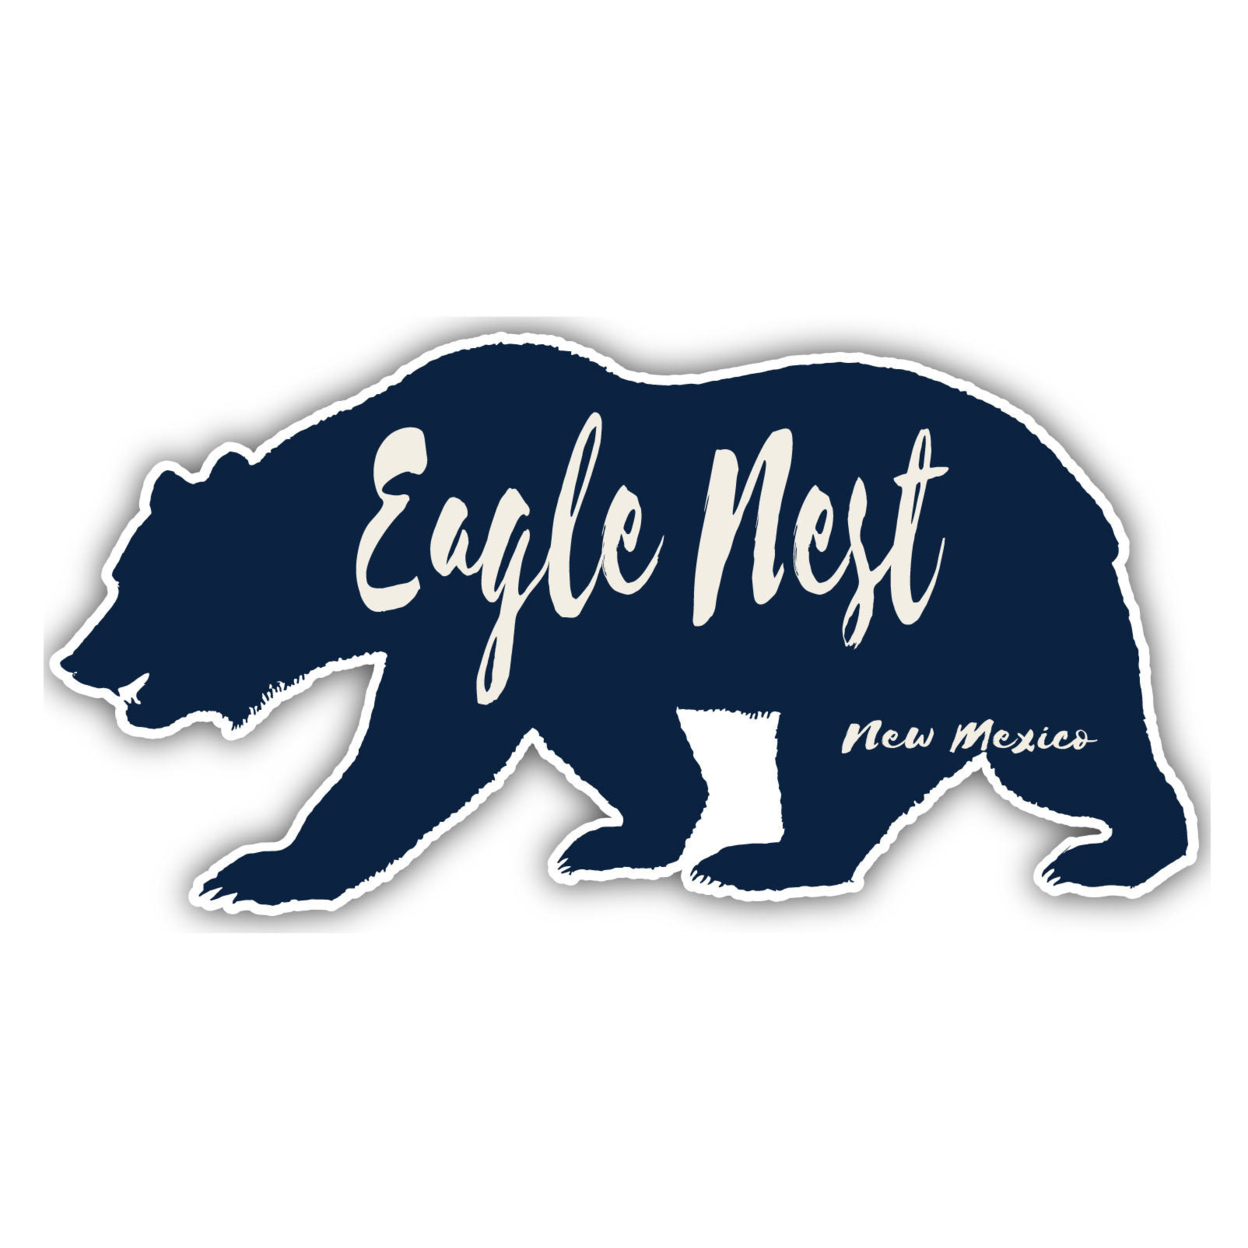 Eagle Nest New Mexico Souvenir Decorative Stickers (Choose Theme And Size) - 4-Pack, 12-Inch, Great Outdoors